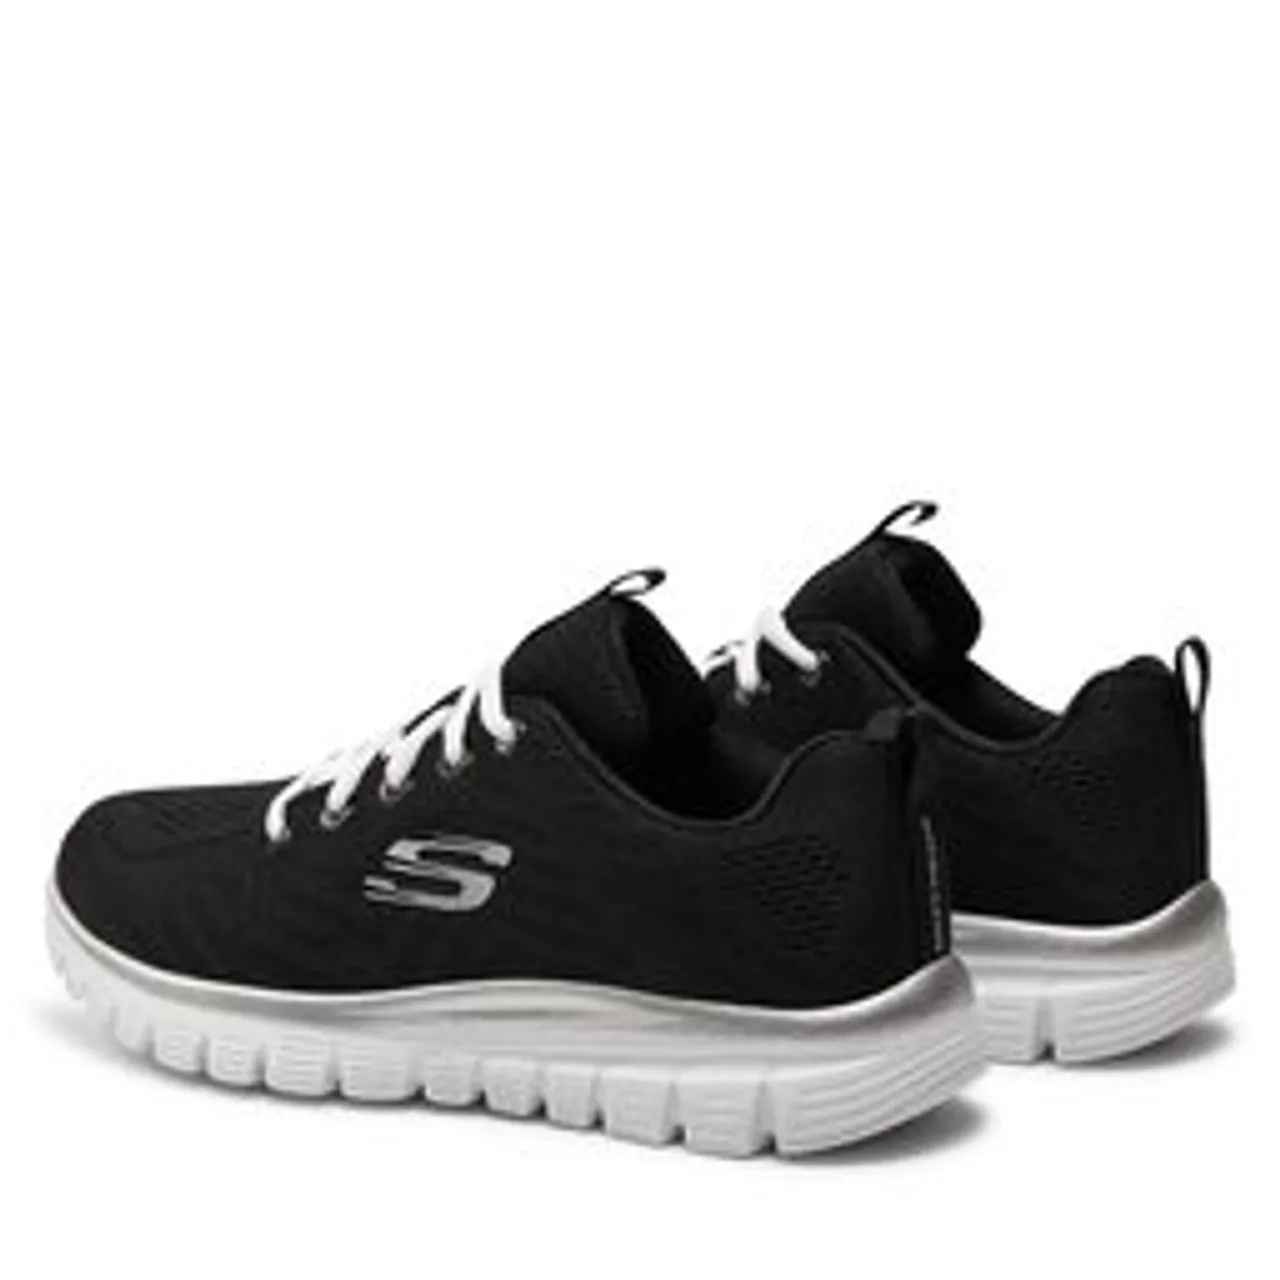 Schuhe Skechers Get Connected 12615/BKW Black/White